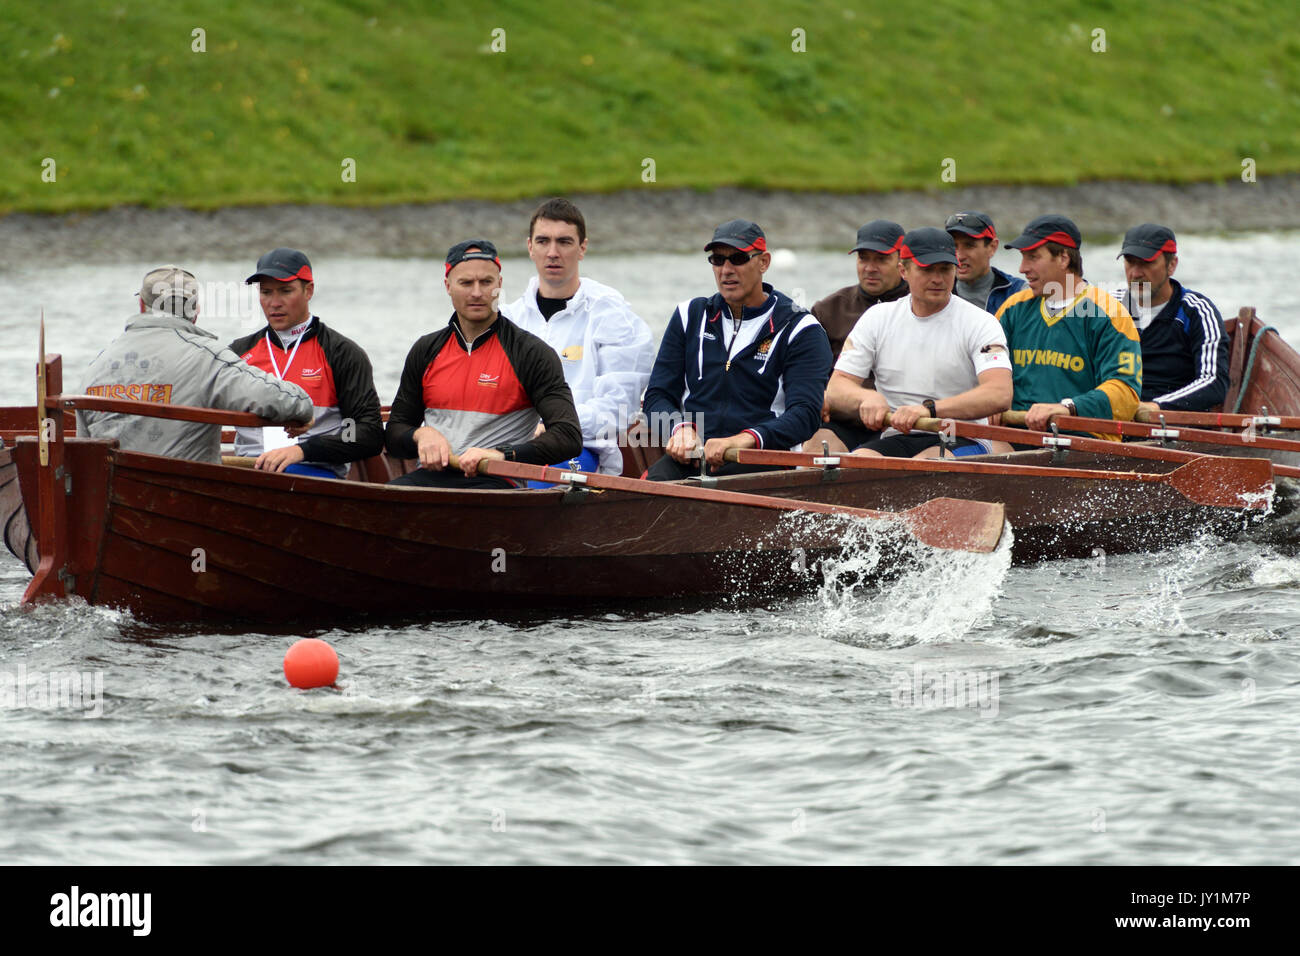 St. Petersburg, Russia - June 12, 2015: Competitions of Viking boats during the Golden Blades Regatta. This kind of competitions make the race accessi Stock Photo